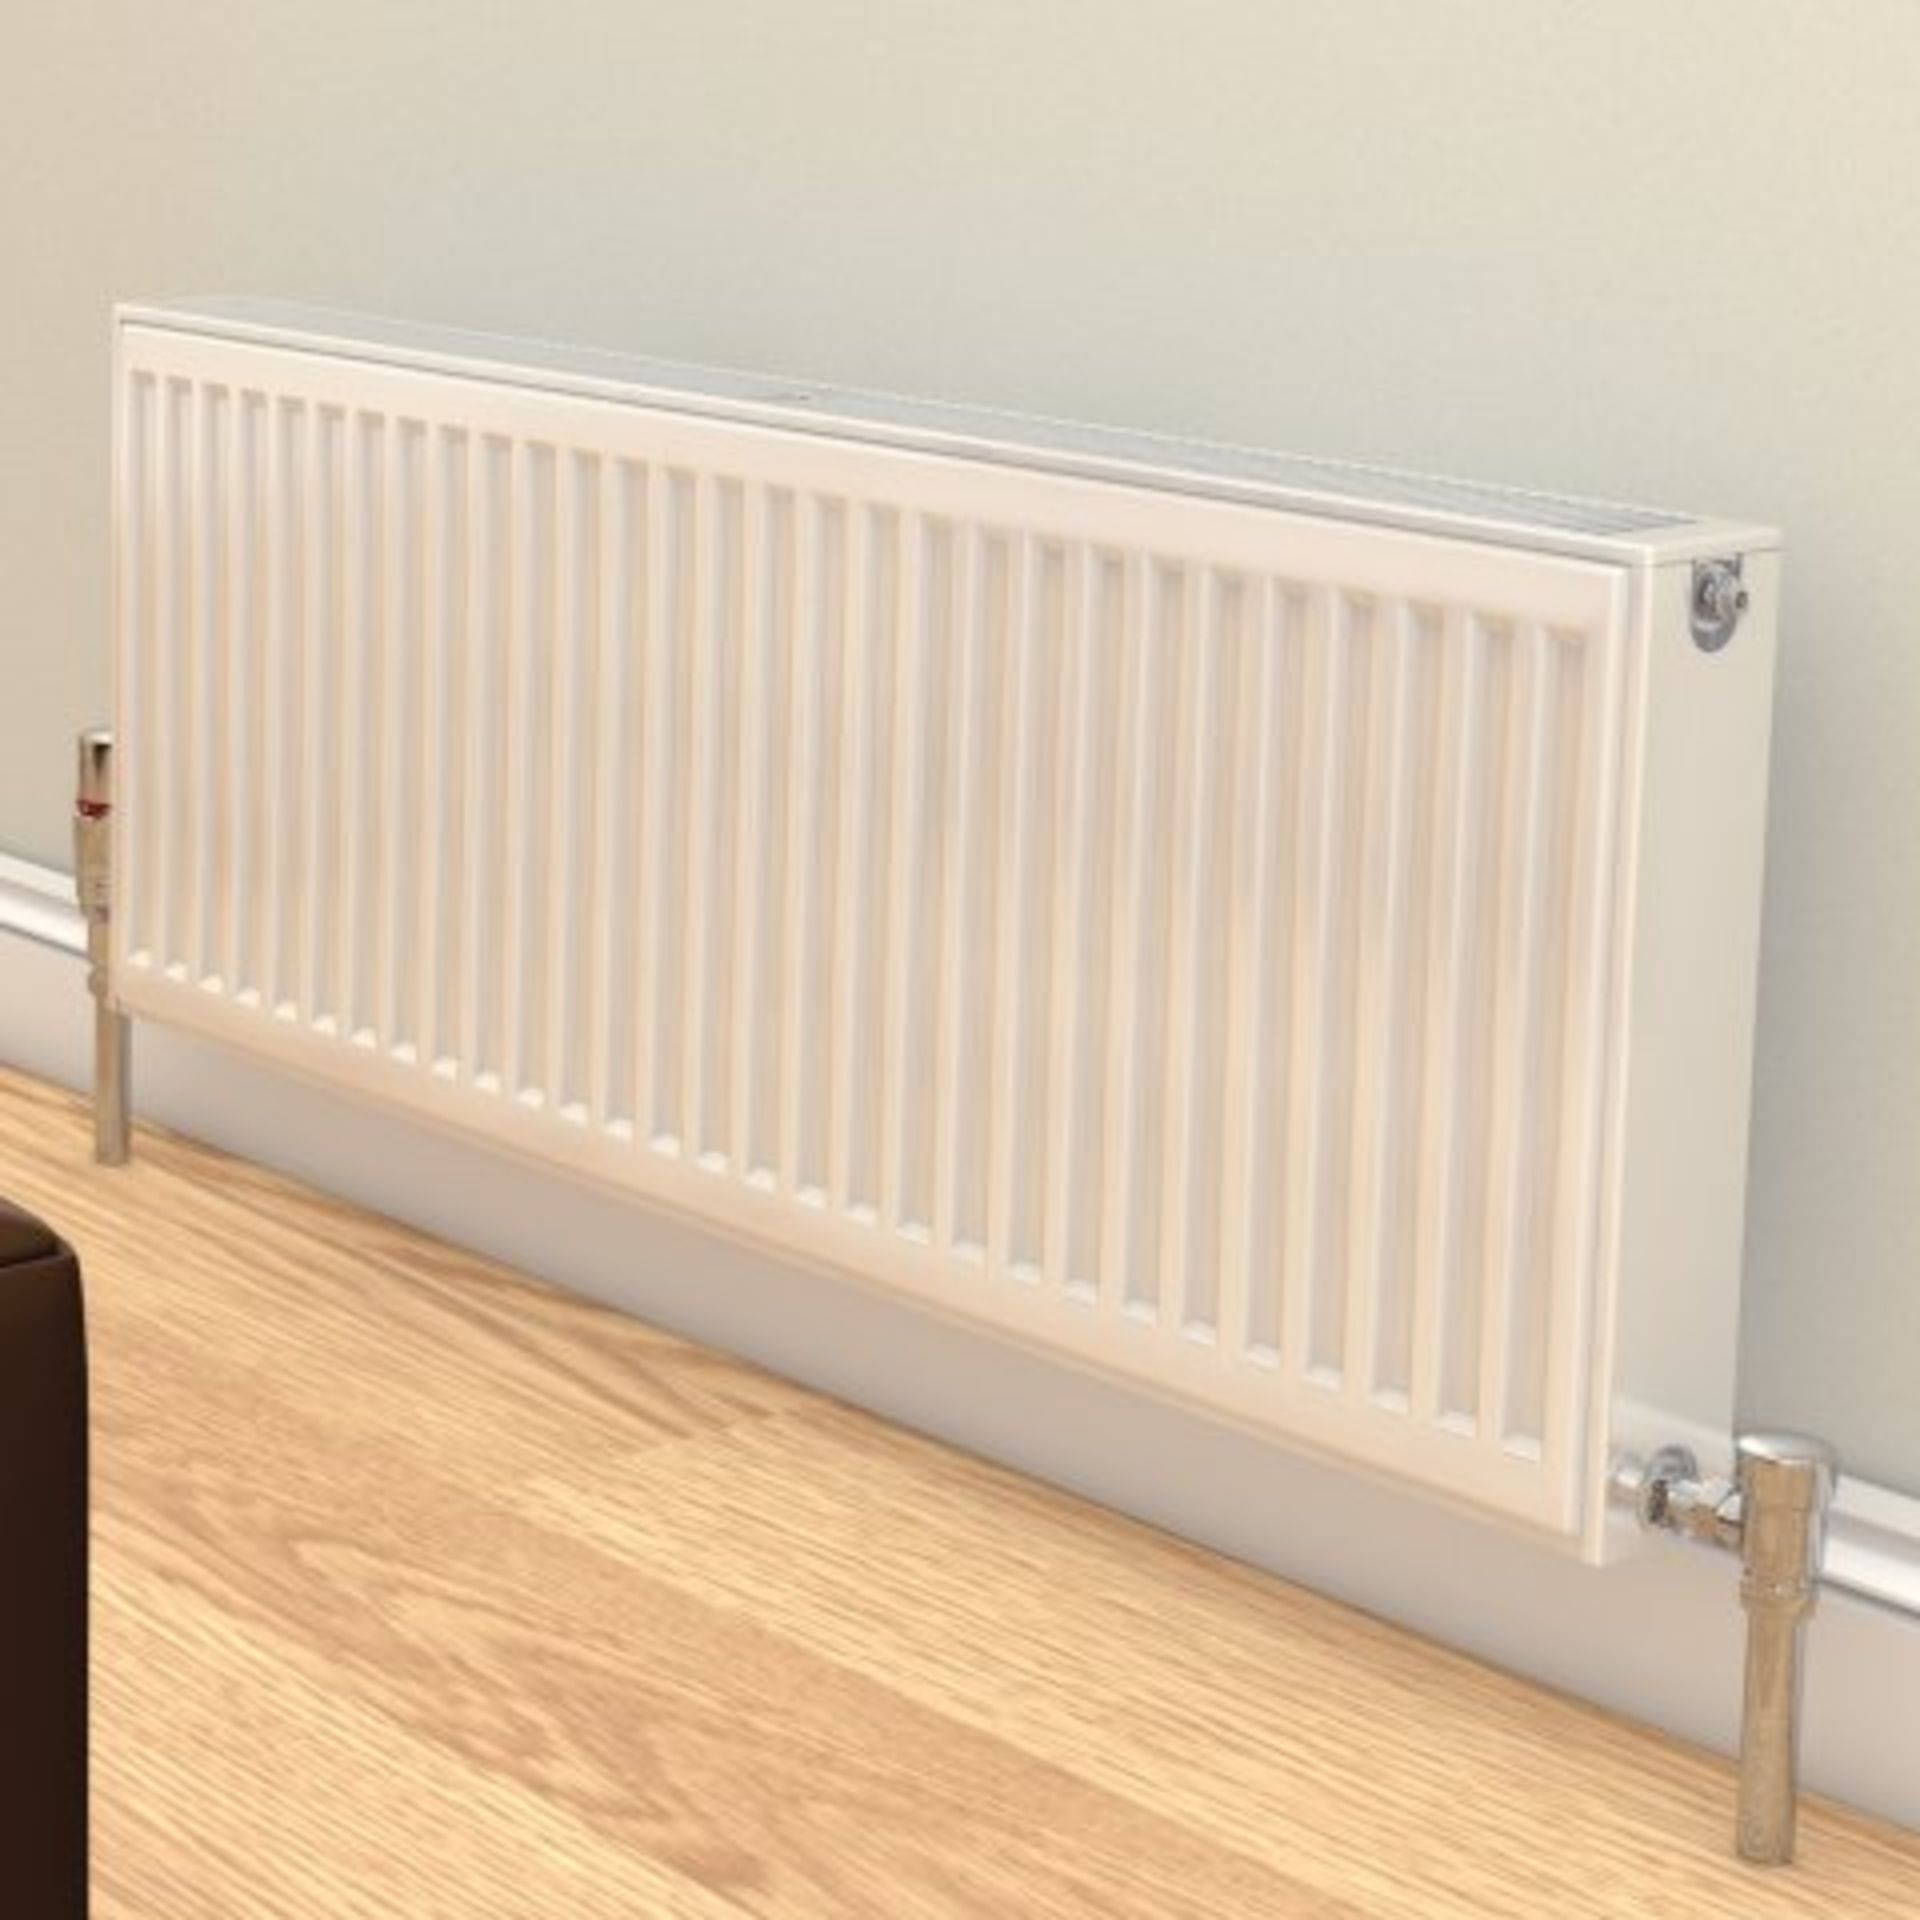 (J62) 600x1600mm White Vita Compact Horizontal Radiator K1. RRP £199.99. Our beautifully produced - Image 2 of 3